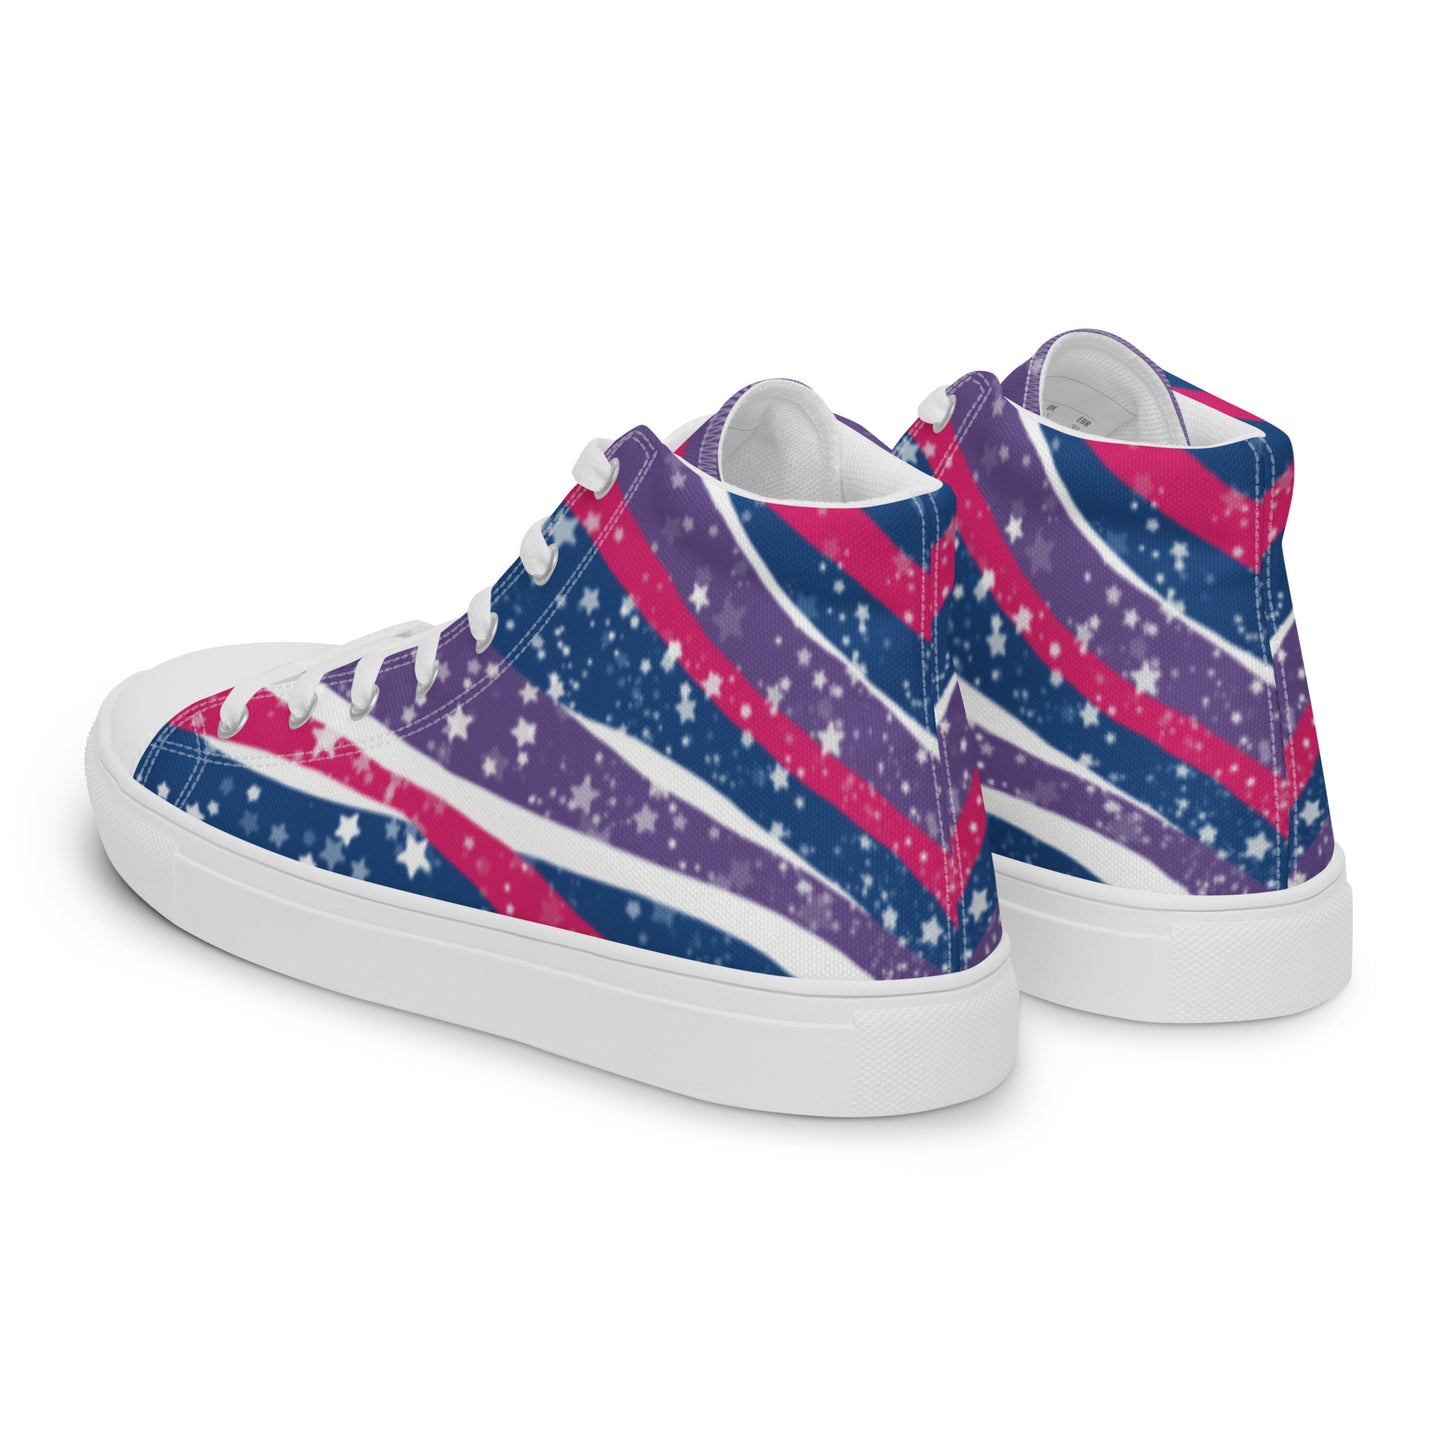 Left back view: a pair of high top shoes with pink, purple, and blue ribbons that get larger from heel to laces, white stars, and the Aras Sivad logo on the tongue.